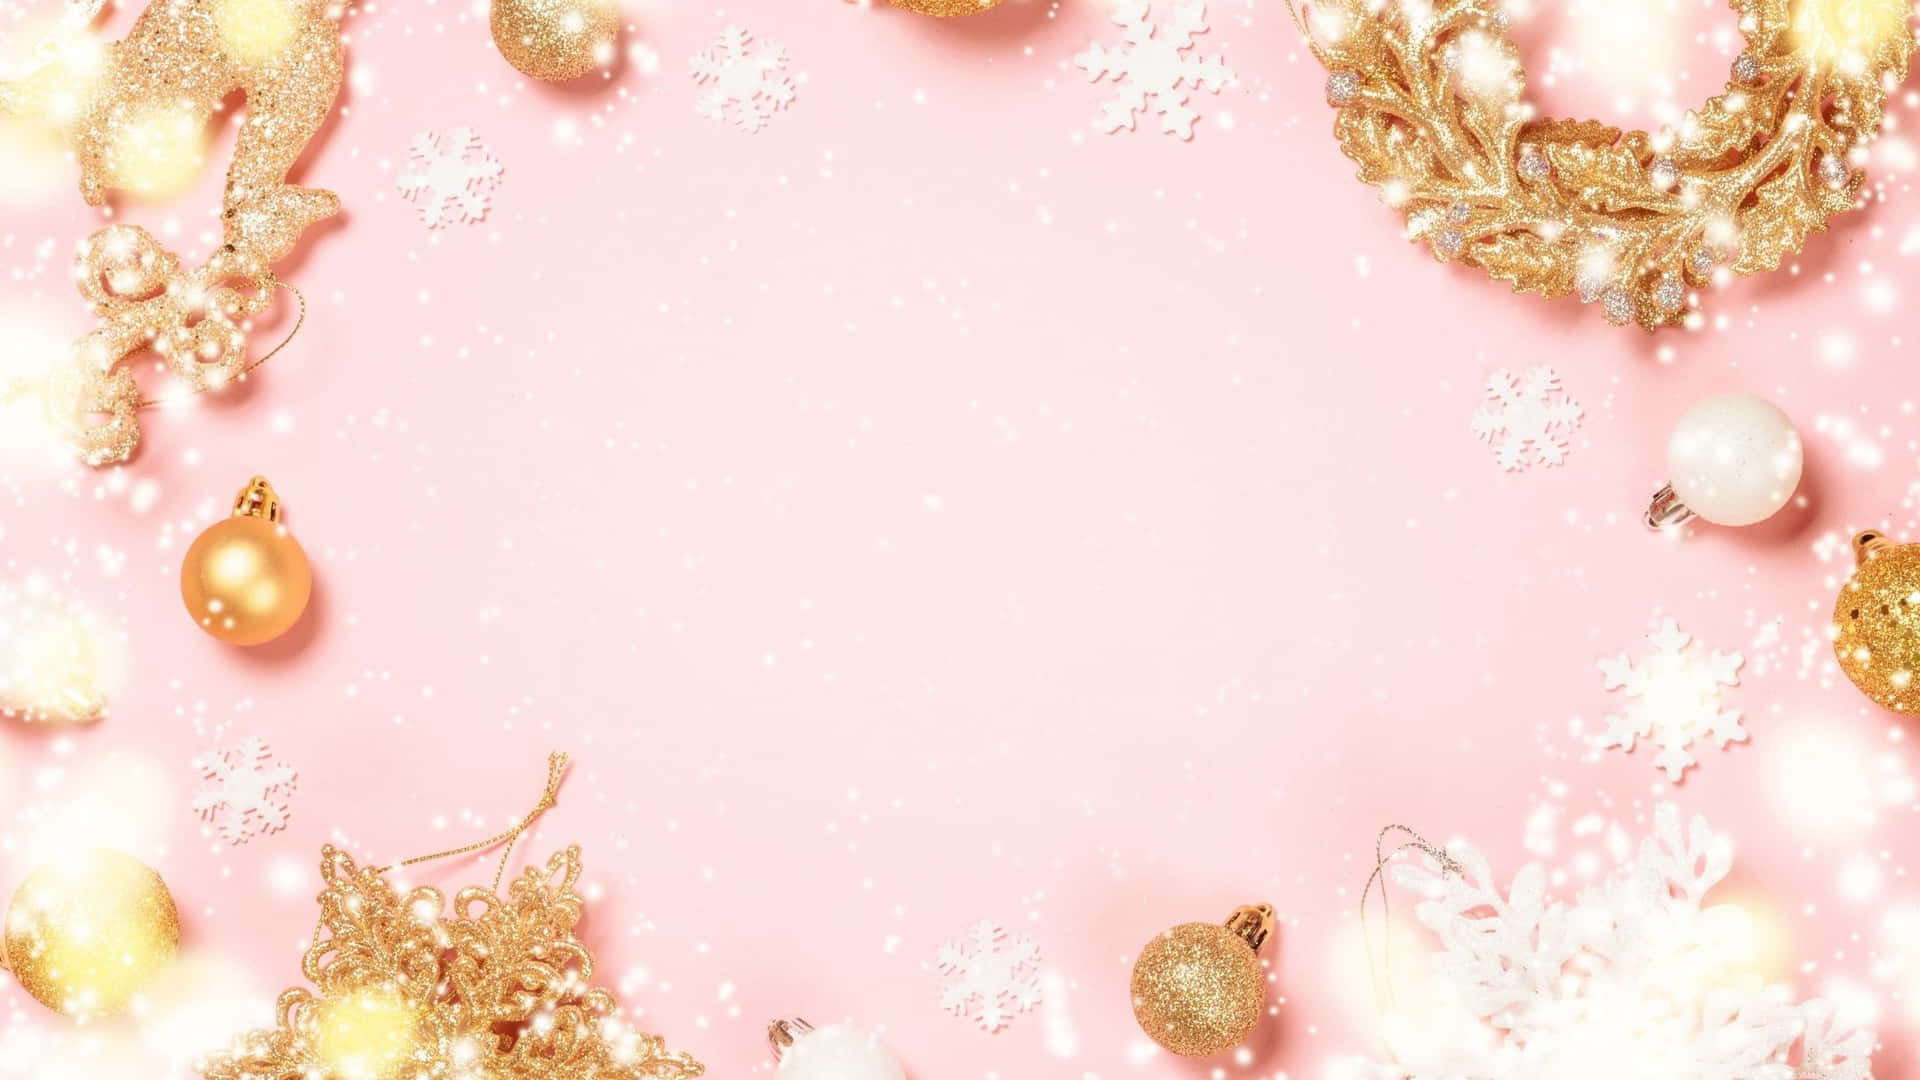 Download Christmas Background With Gold Decorations On Pink Background ...